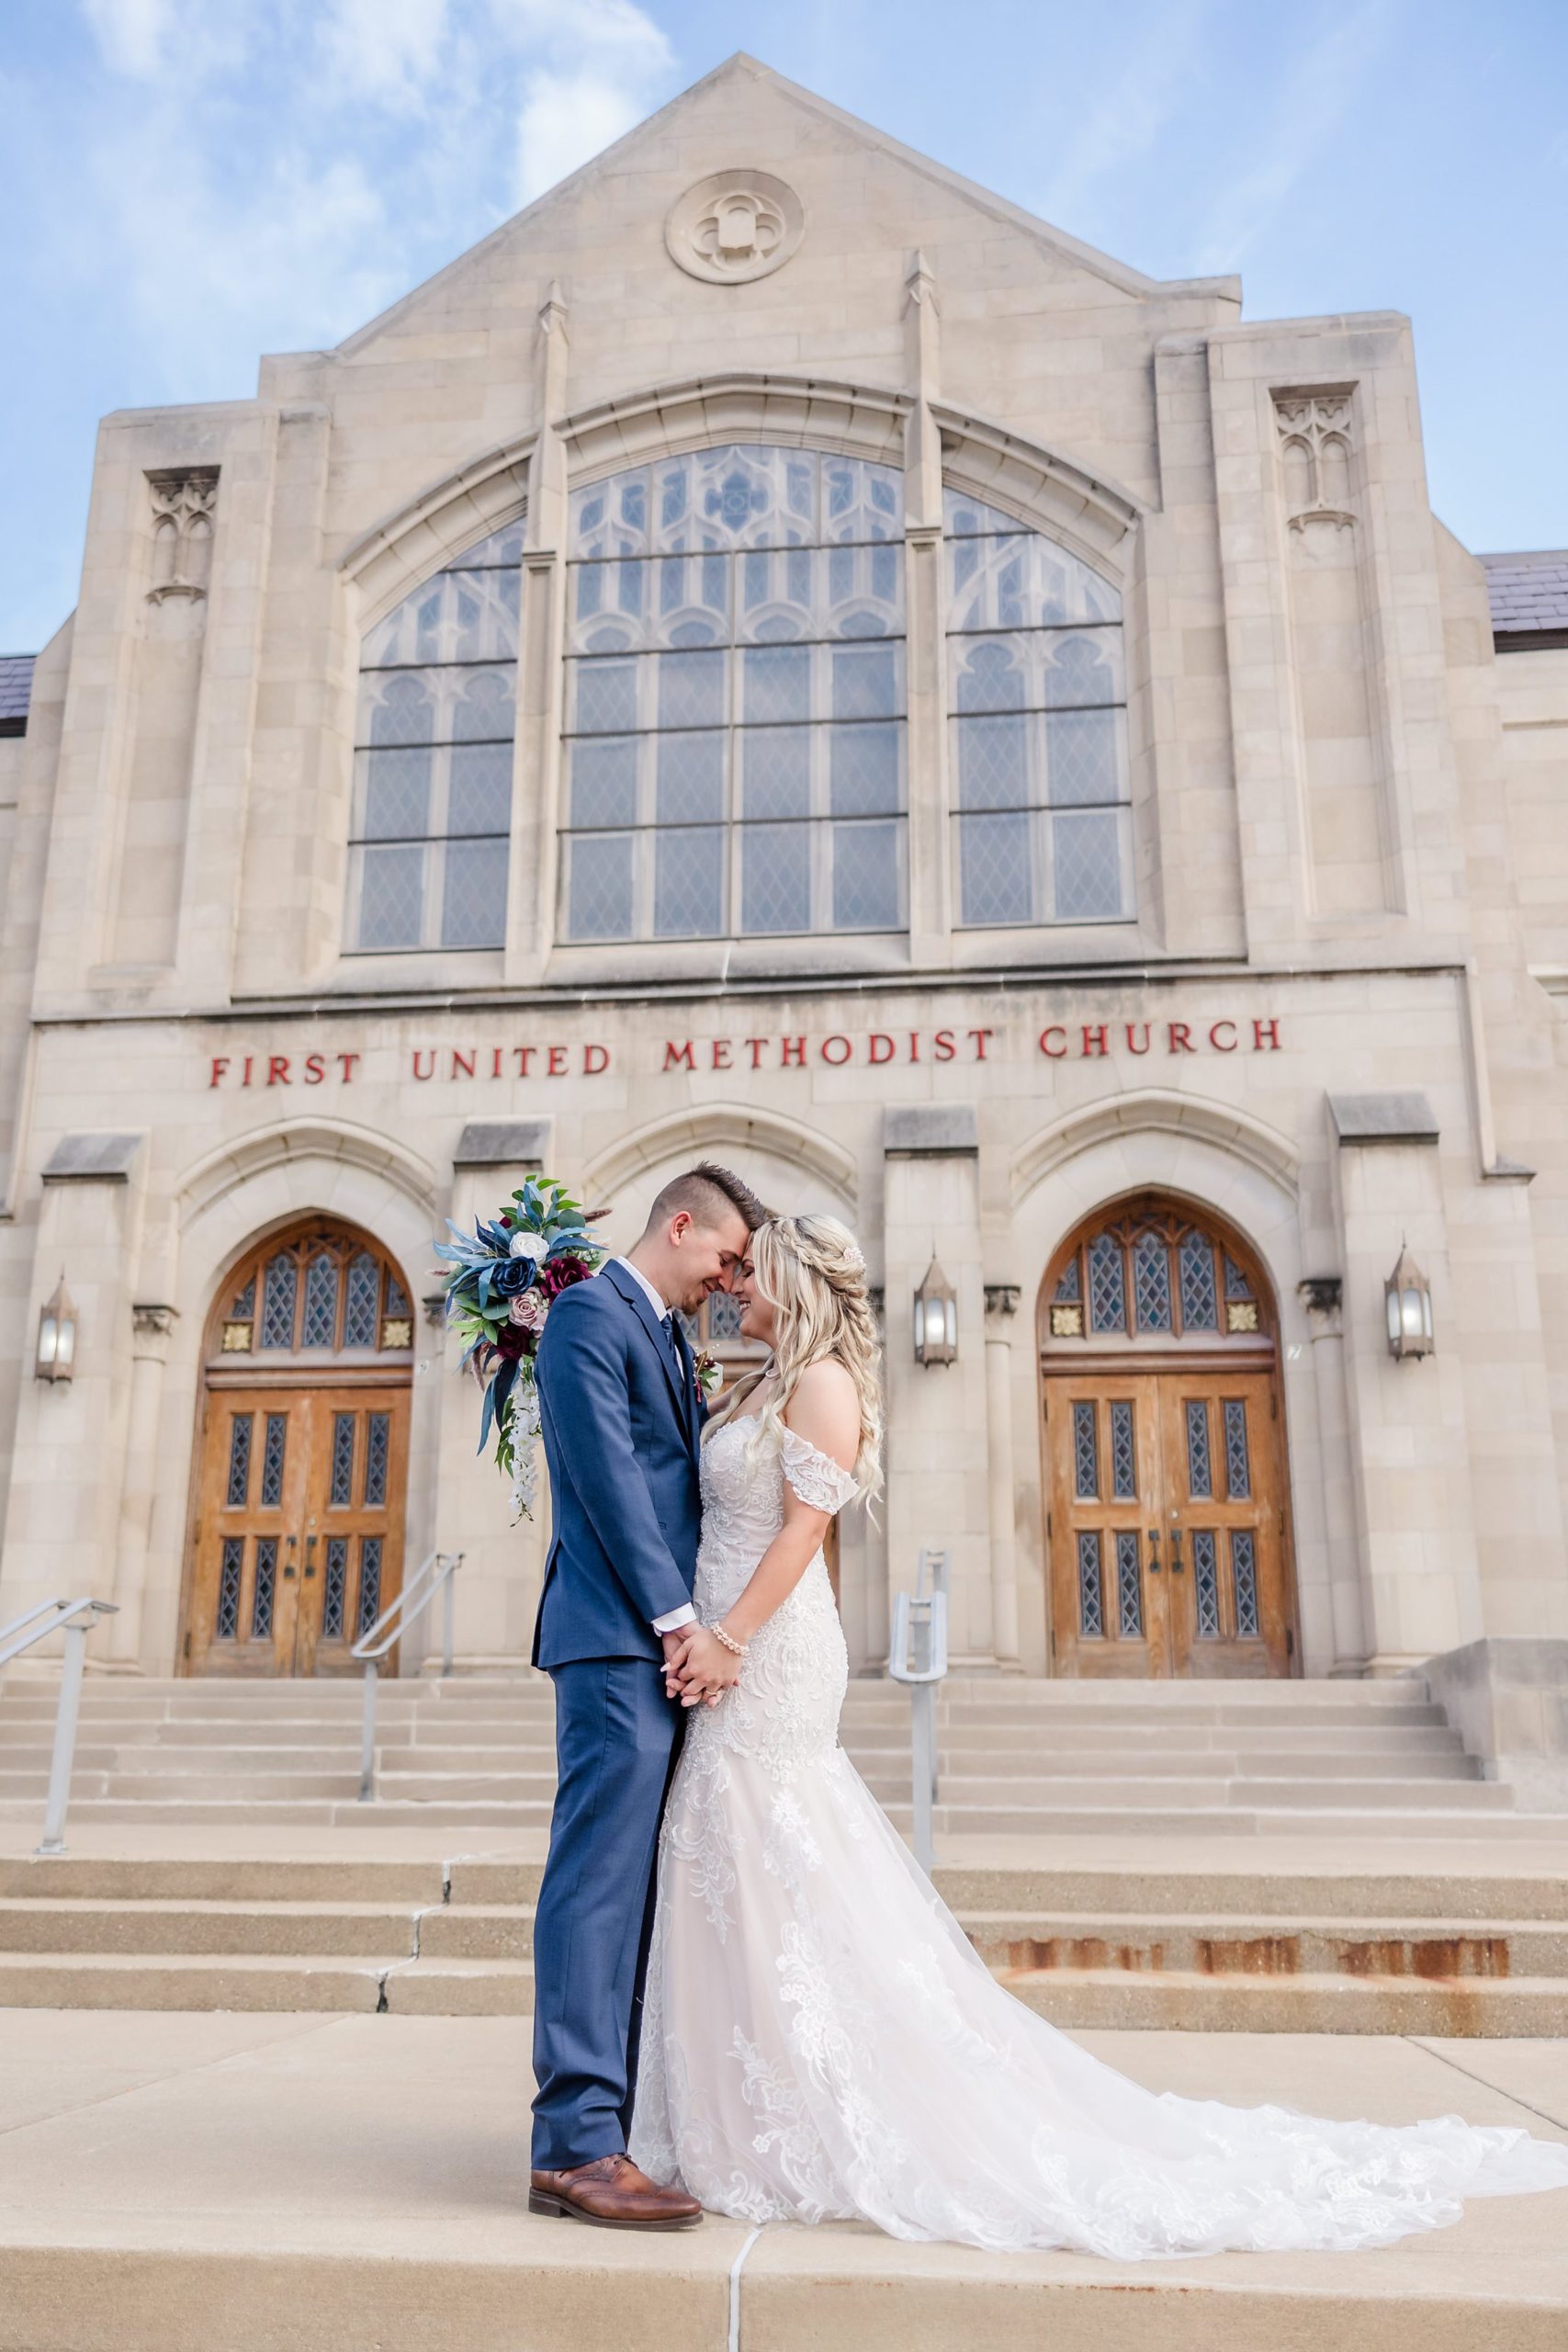 Bride and Groom embrace after their wedding ceremony at the First United Methodist Church in Peoria, Illinois